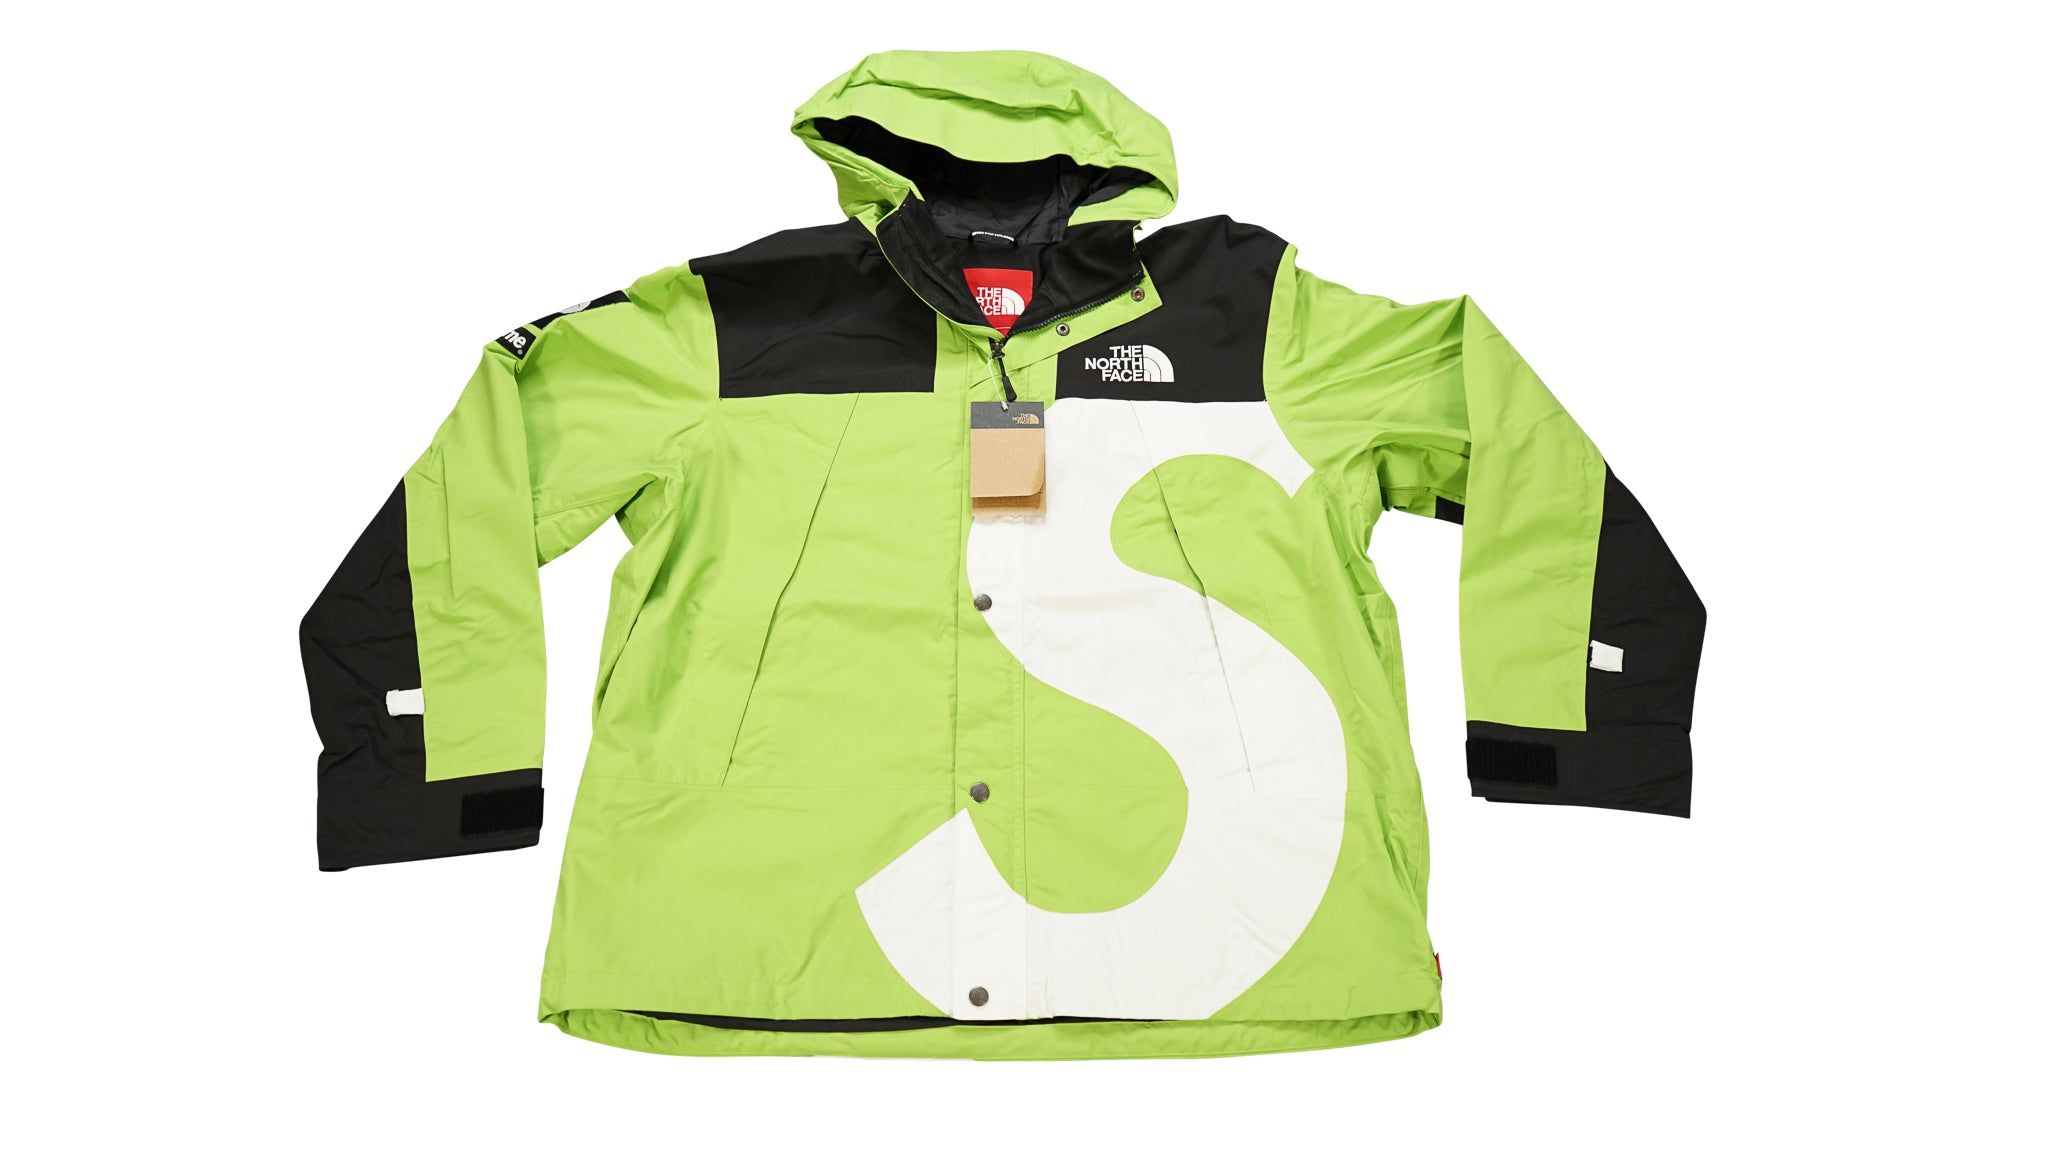 Fascinerend verkopen strategie FW20 Supreme x The North Face "S Logo" Mountain Jacket – Reset Web Store